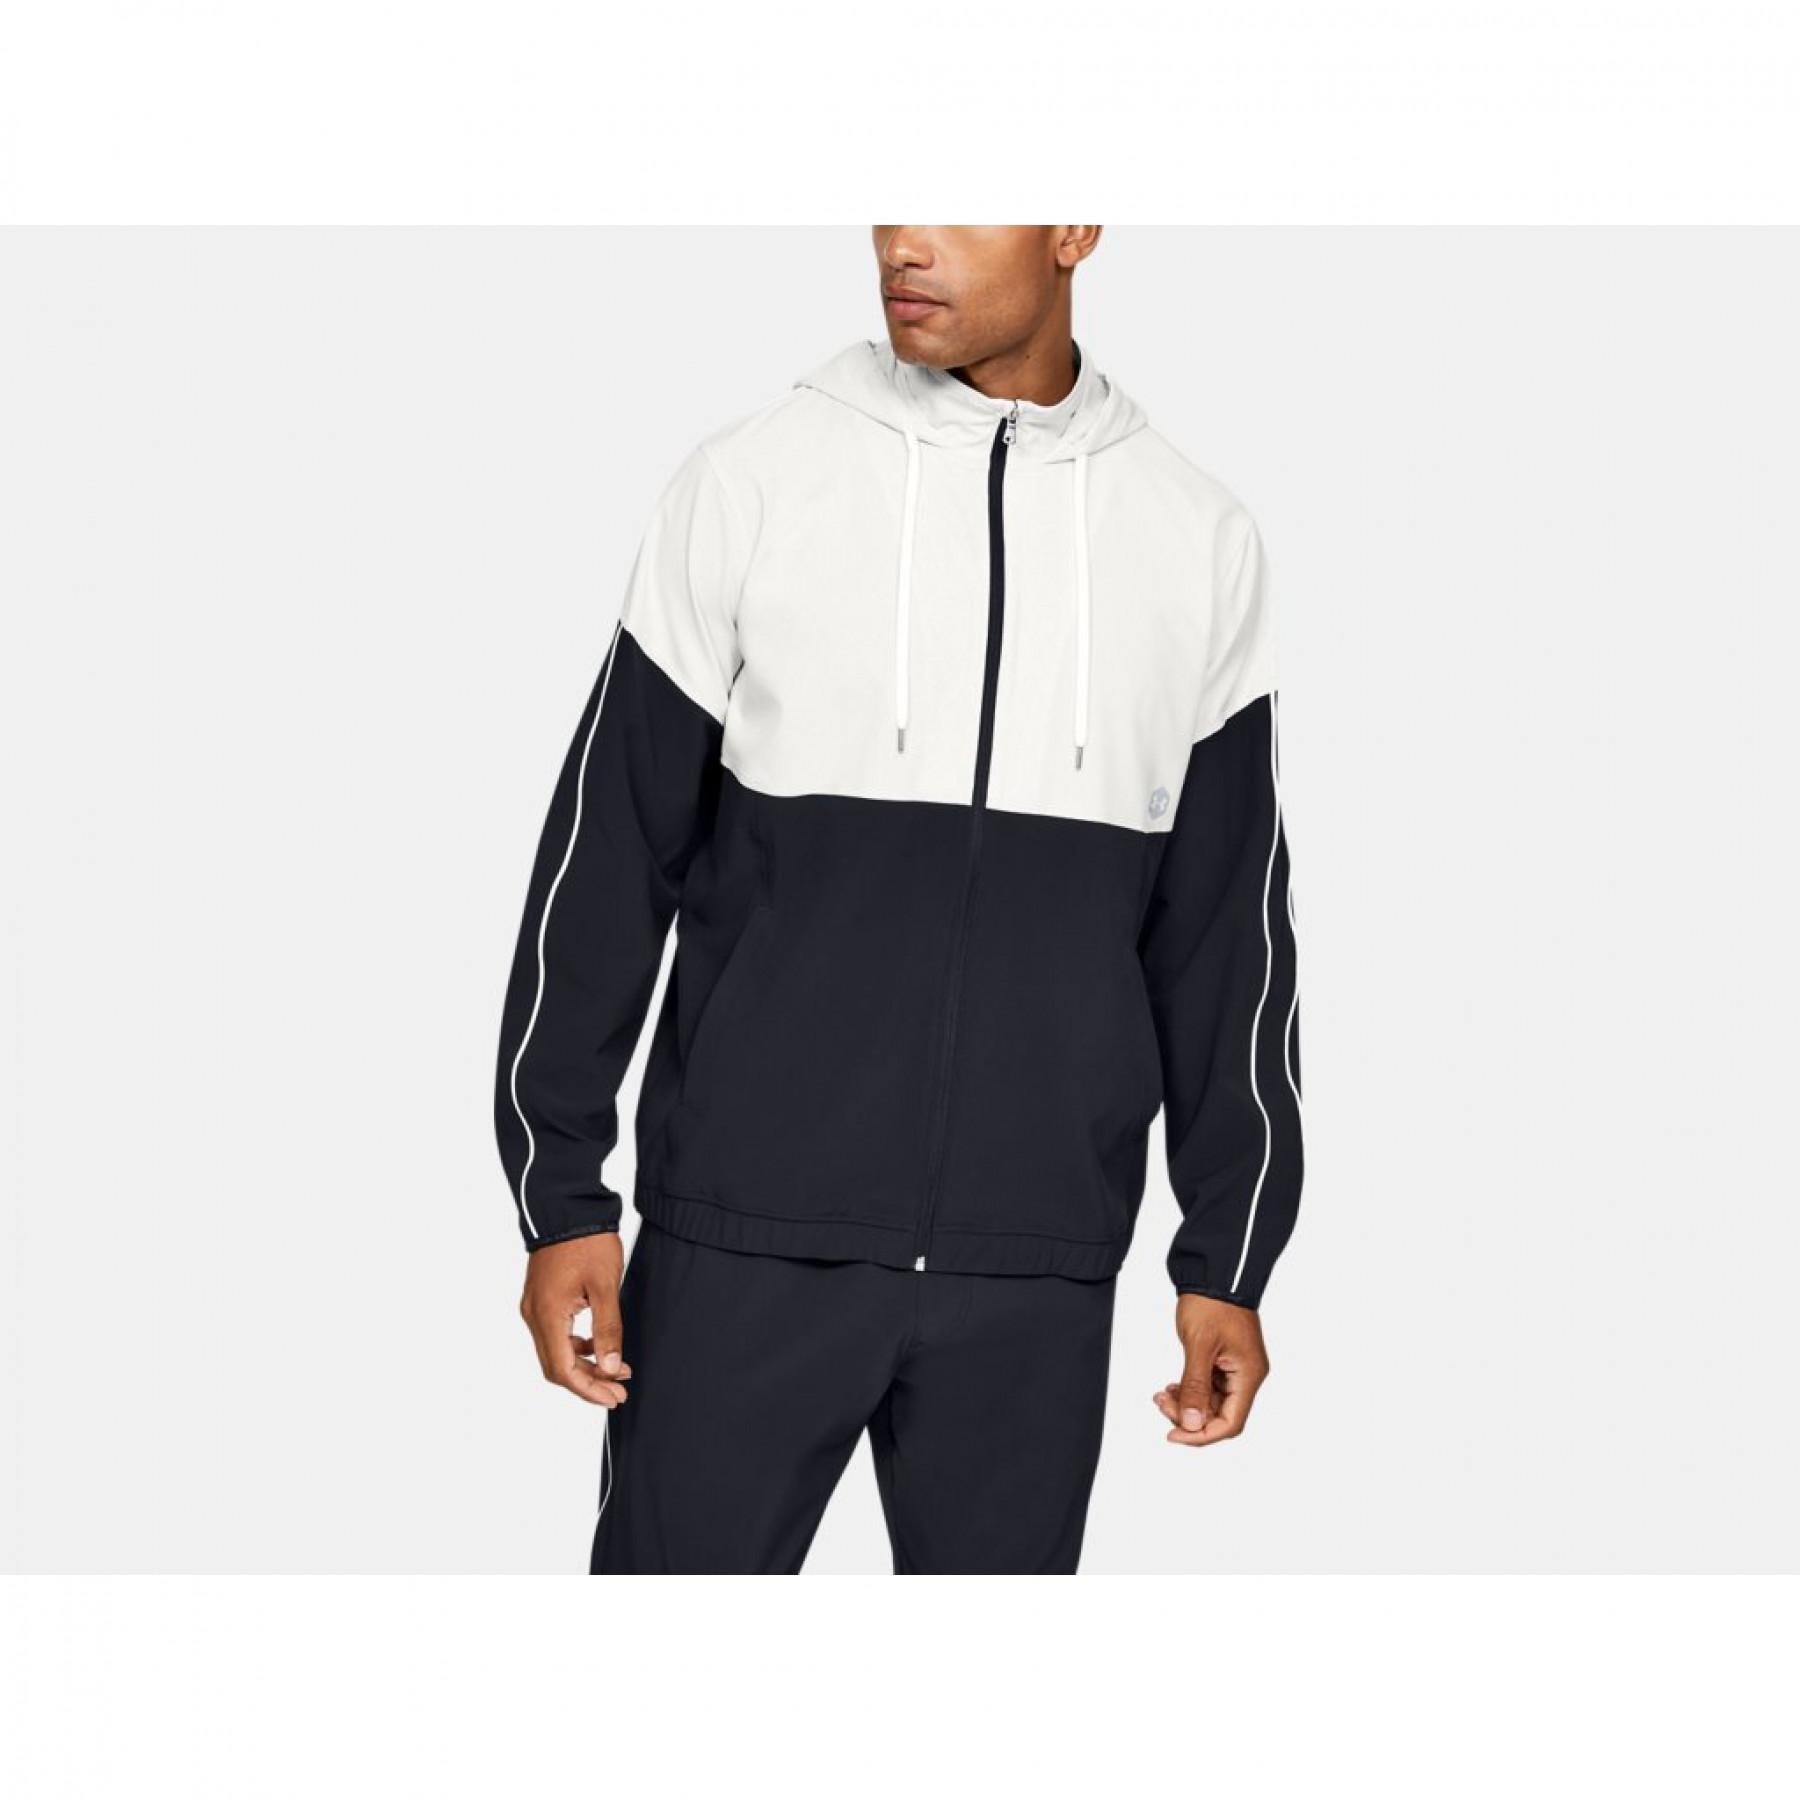 Veste Under Armour Recover Woven Warm-Up